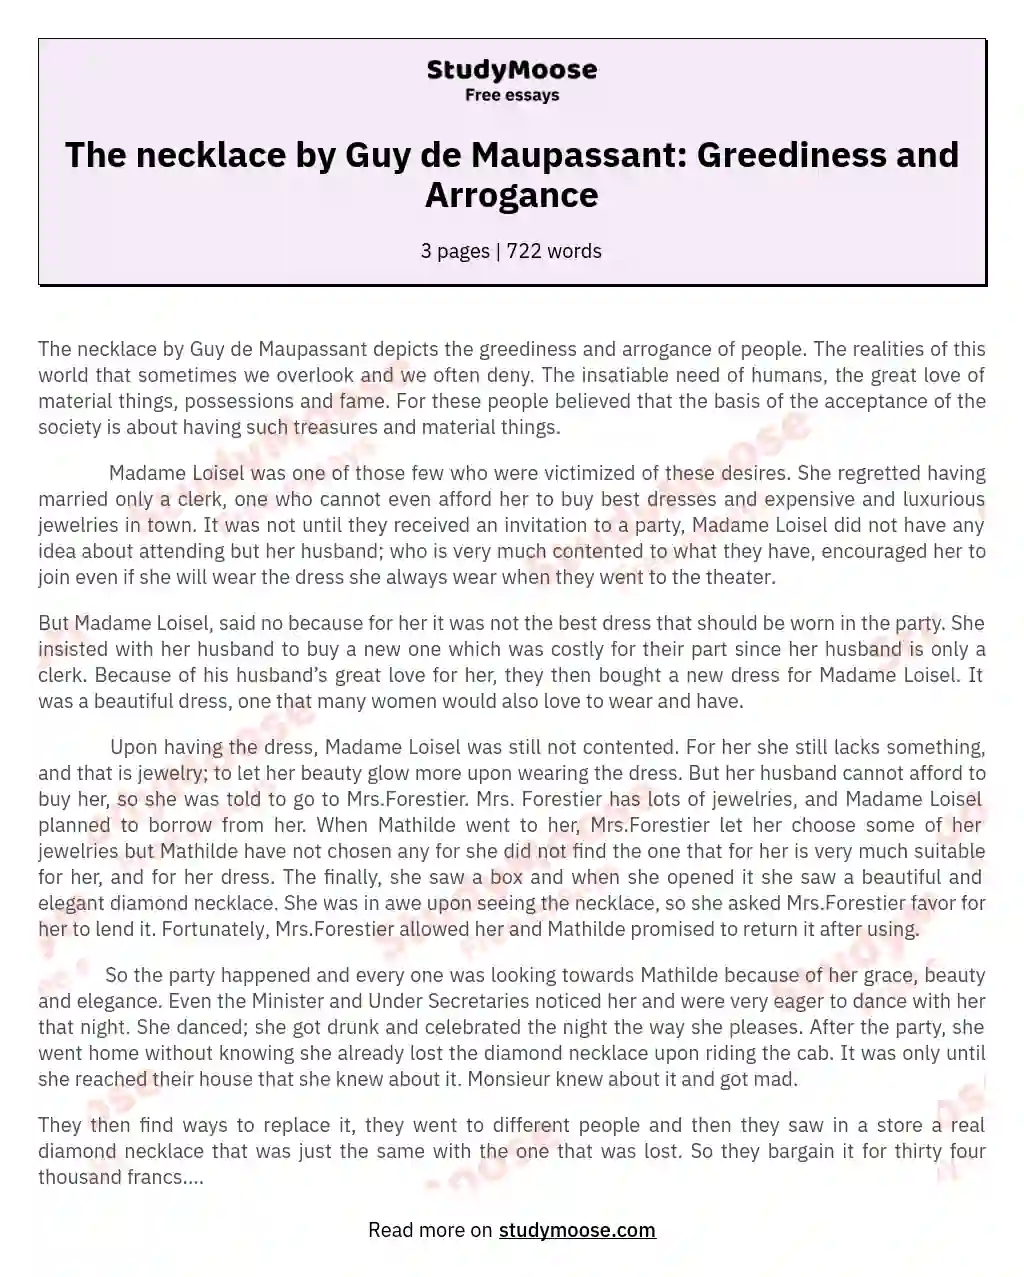 The necklace by Guy de Maupassant: Greediness and Arrogance